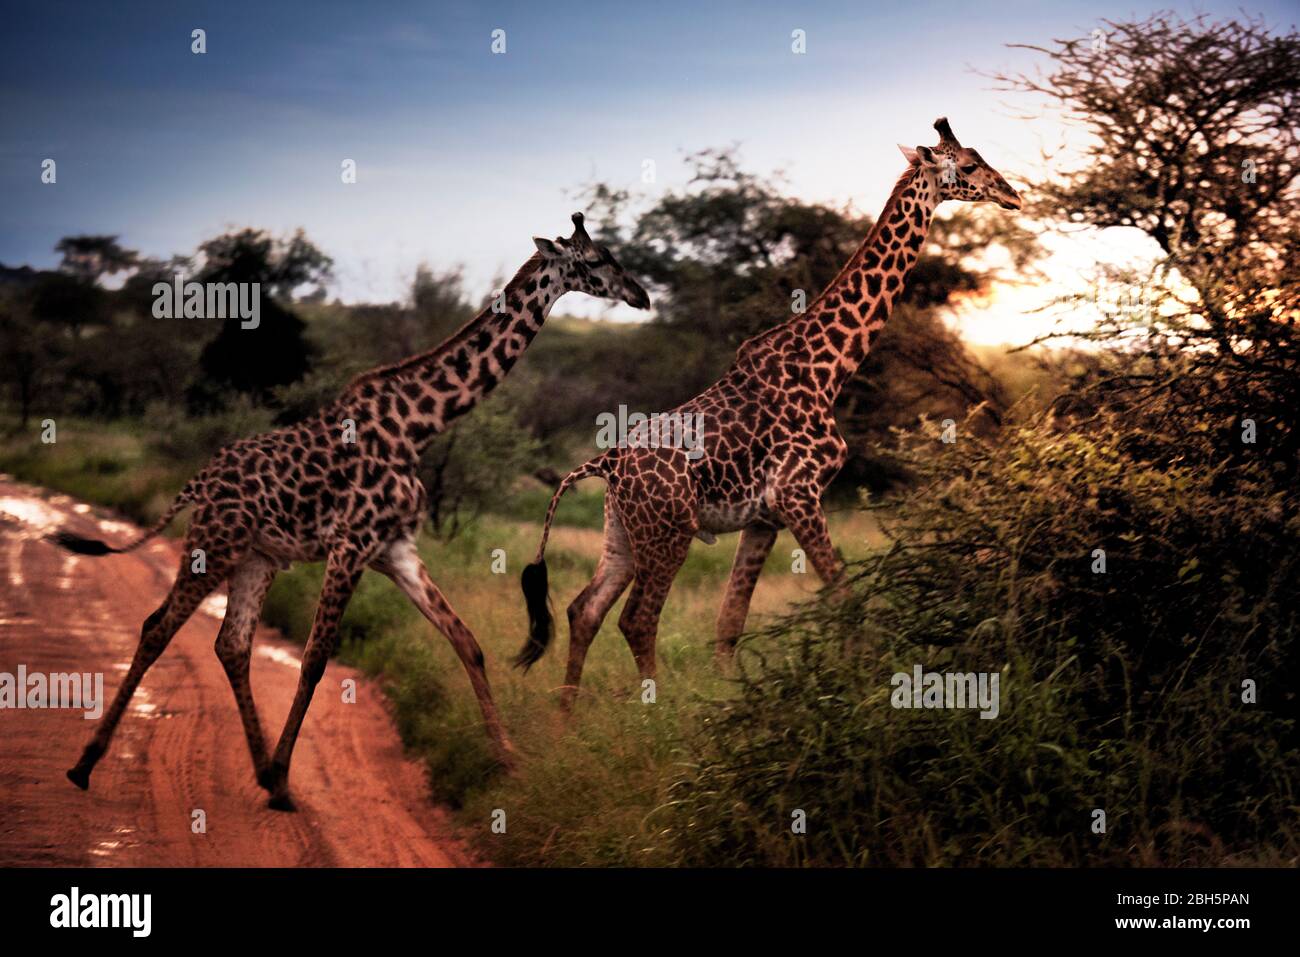 Two giraffes in the sunset Stock Photo